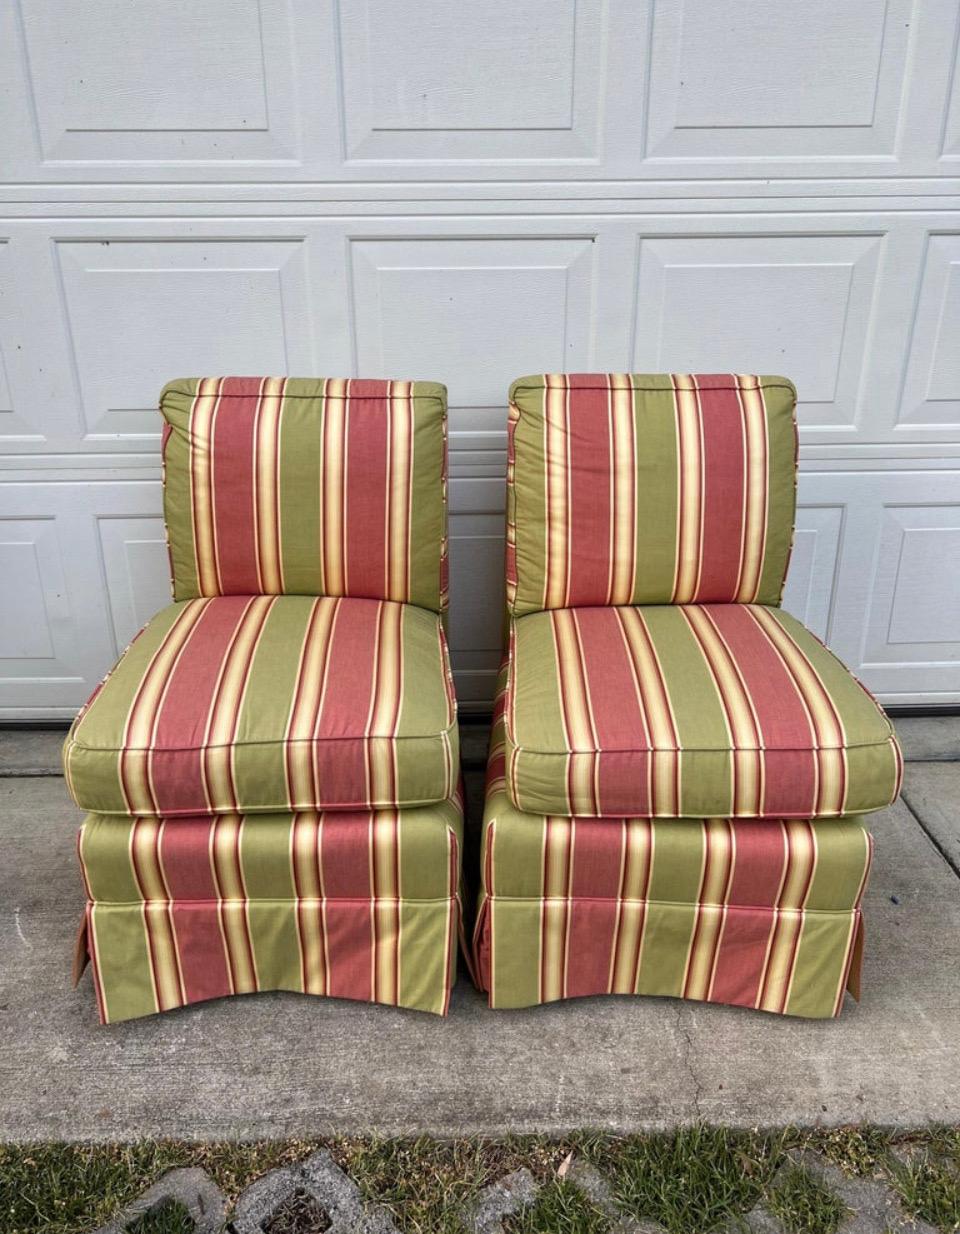 Custom Made Calico corners slipper chairs with down cushions
Happy colors that would brighten any room or reupholster in your favorite fabric 
Chairs are extremely comfortable and high quality.